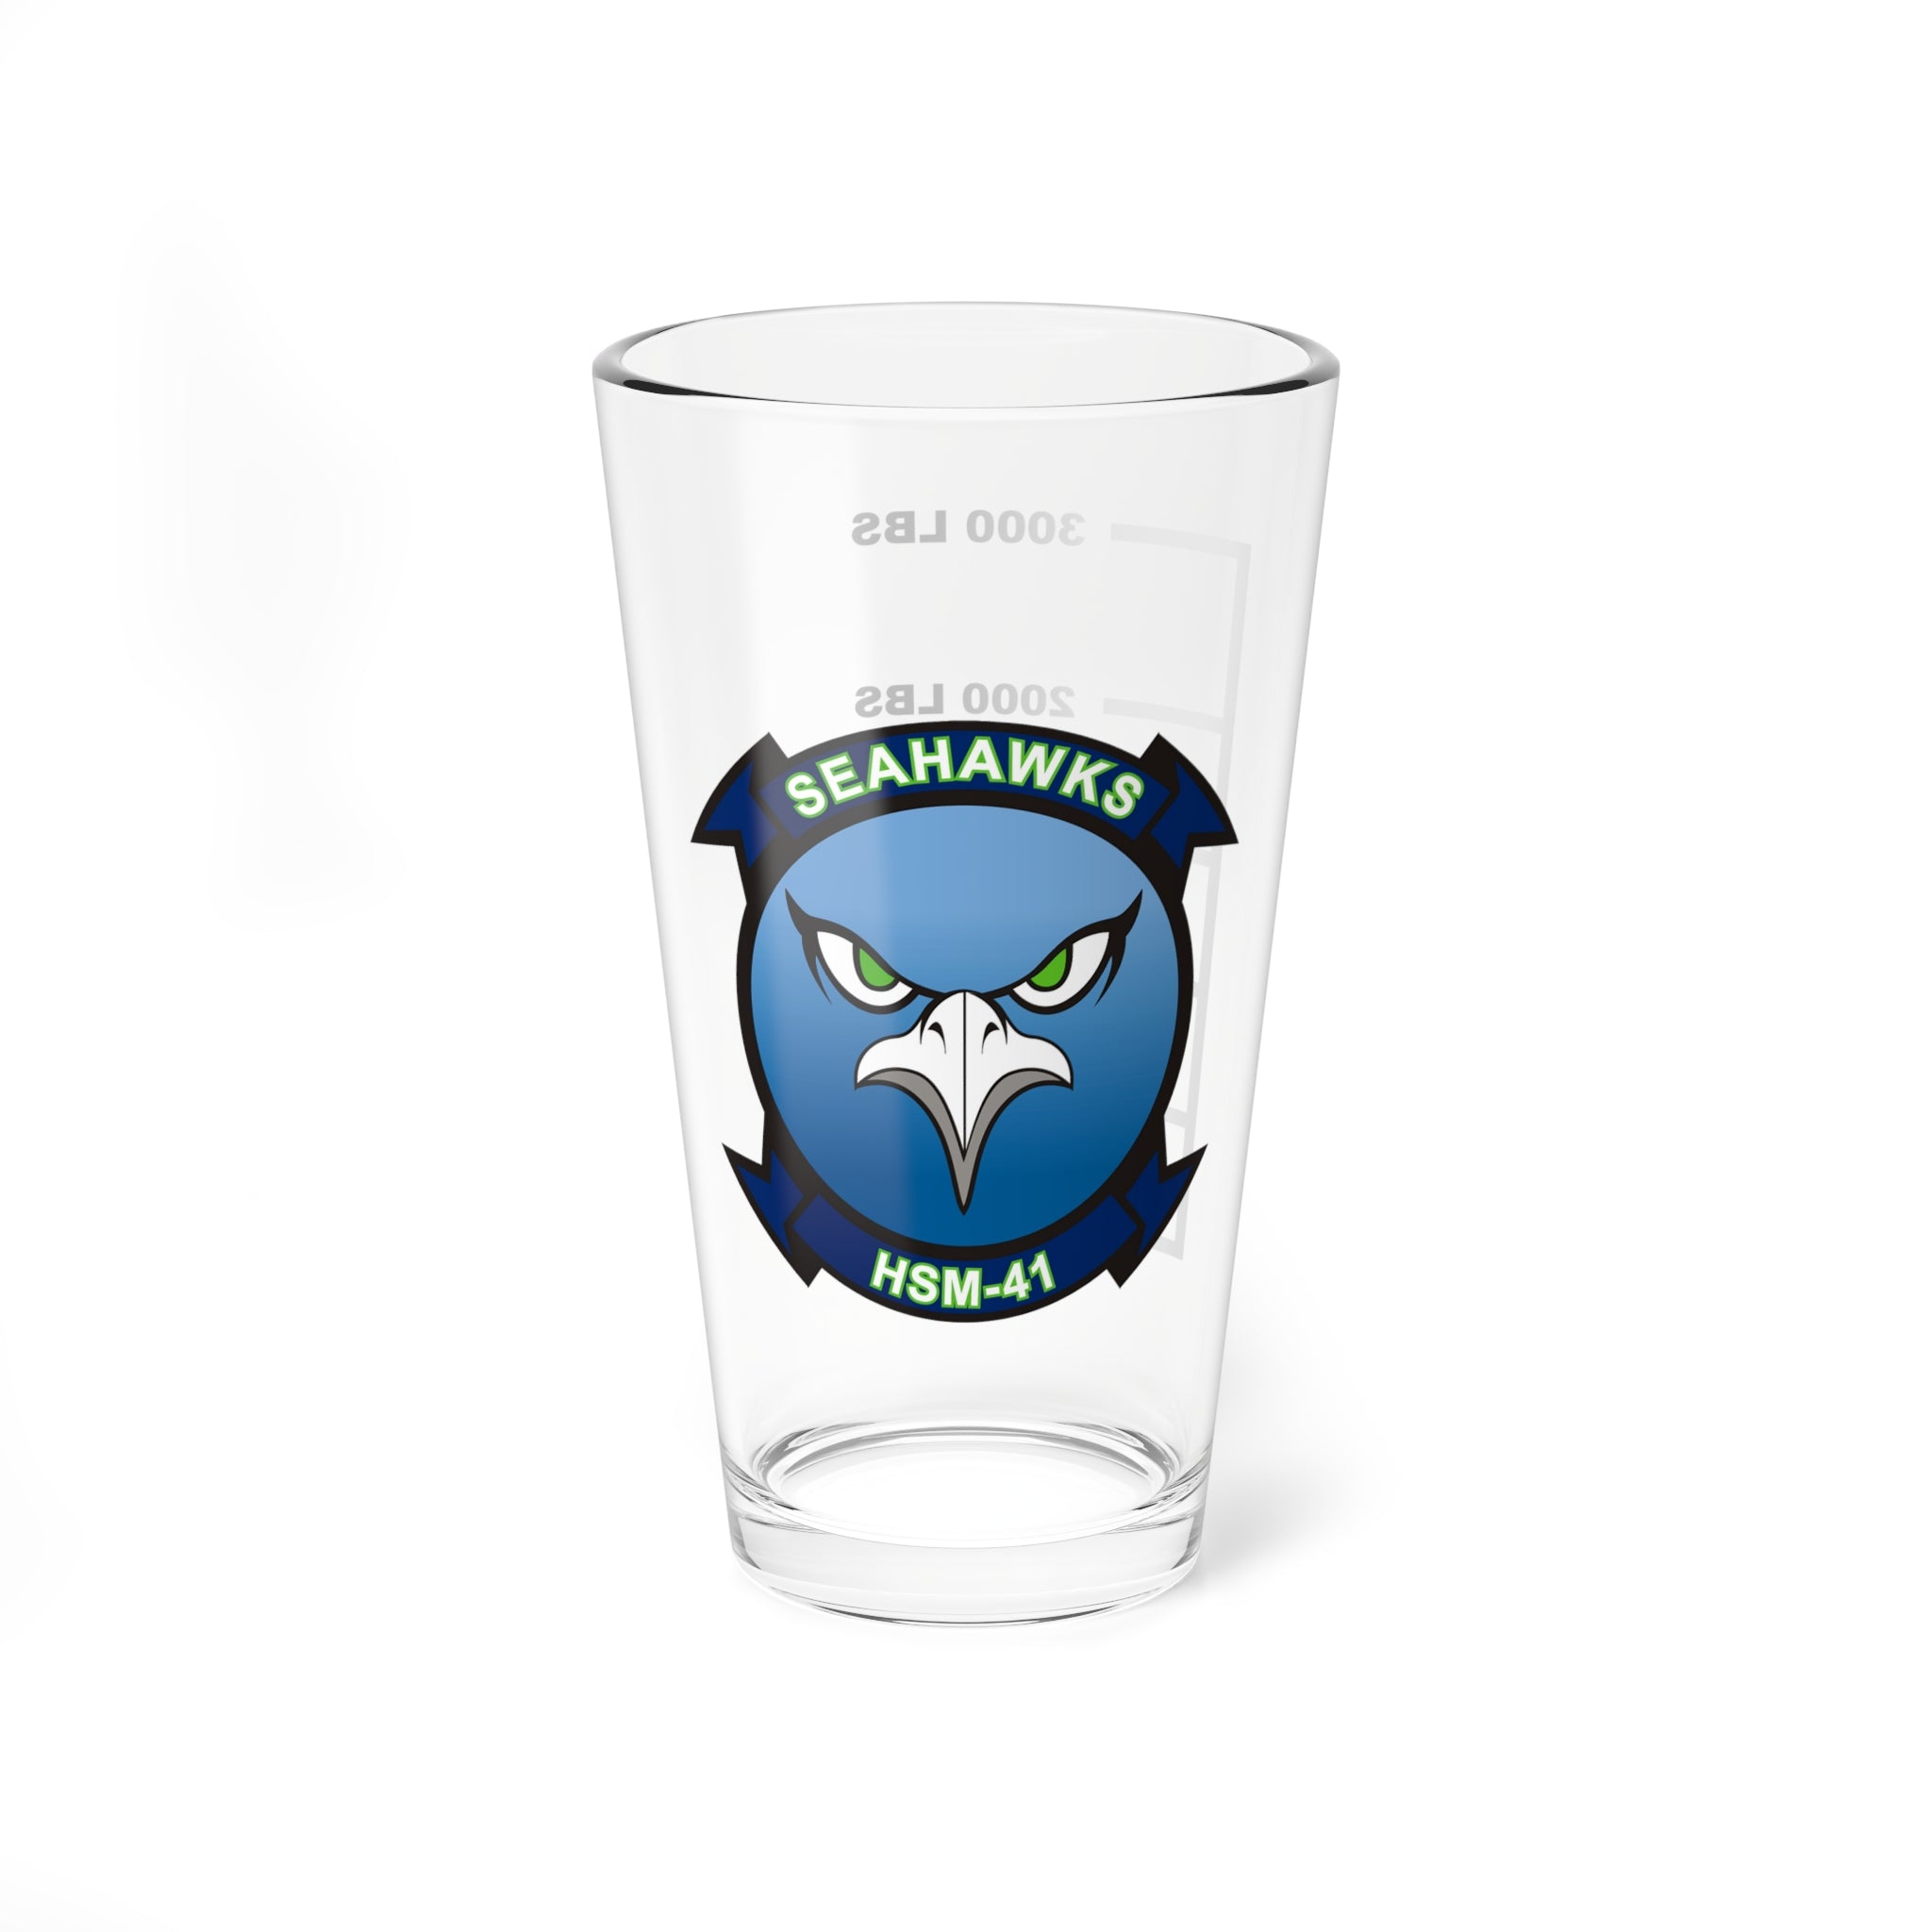 HSM-41 "Seahawks" Fuel Low Pint Glass, 16oz, Navy Helicopter Maritime Strike Replacement Squadron flying the MH-60R